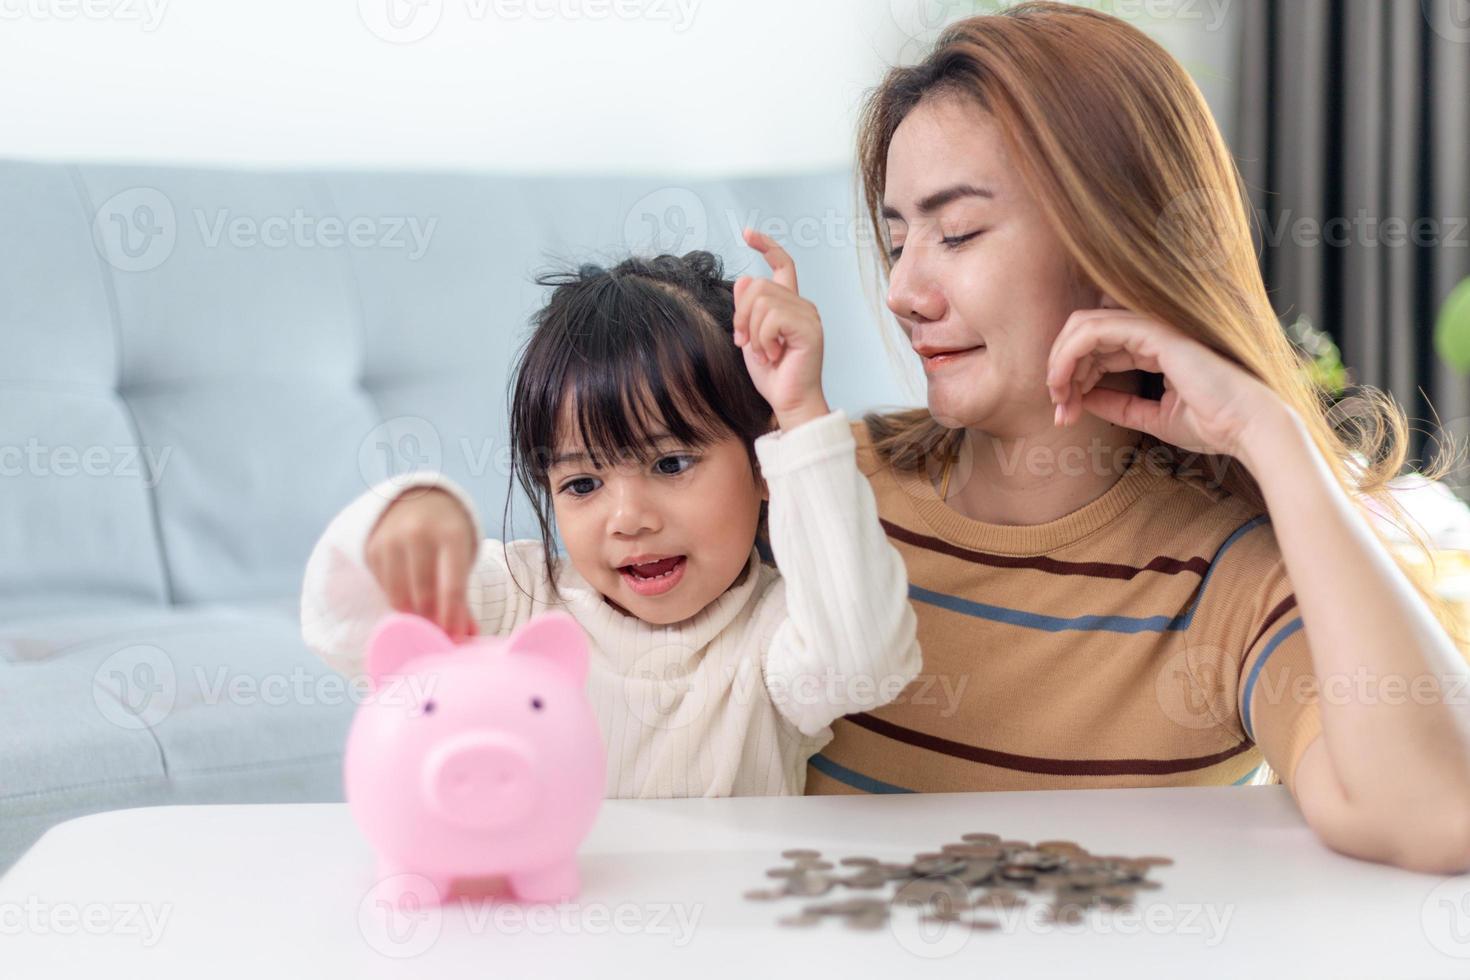 Mother and daughter putting coins into piggy bank. Family budget and savings concept. Junior Savings Account concept photo